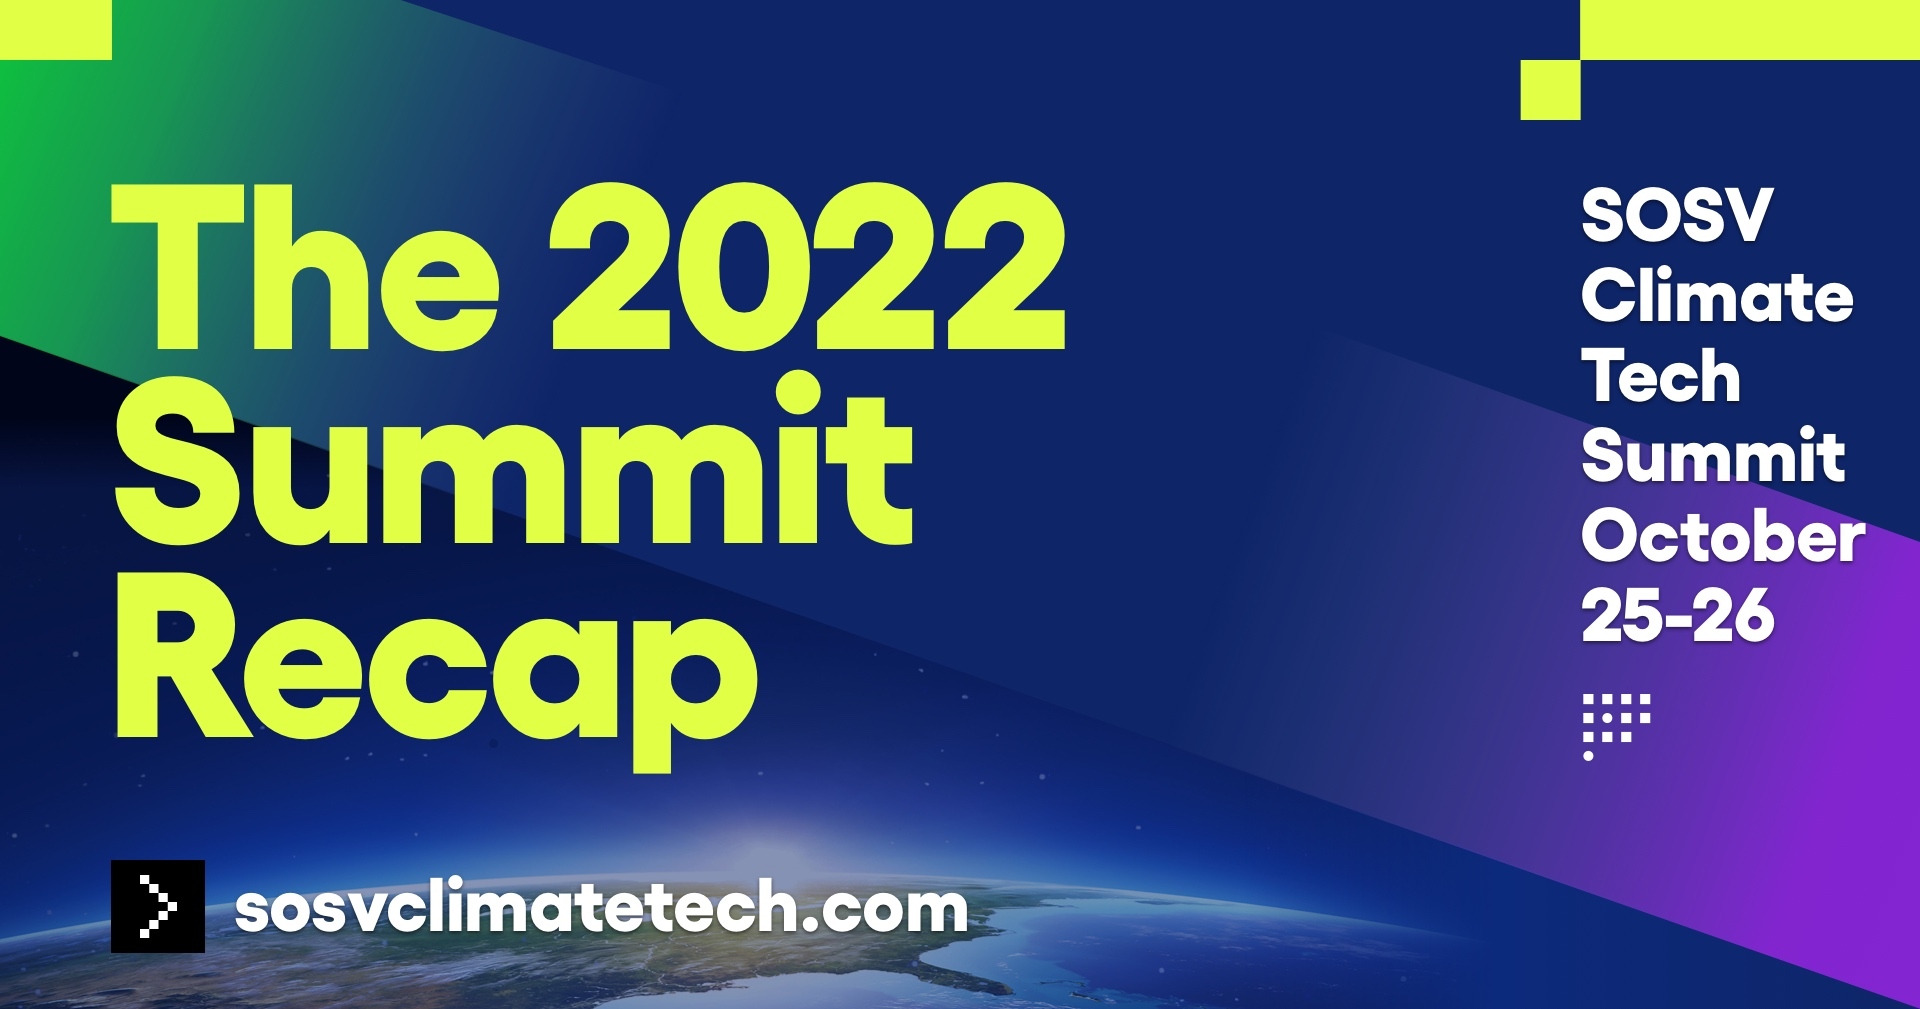 The image ia text only and says The 2022 Summit Recap